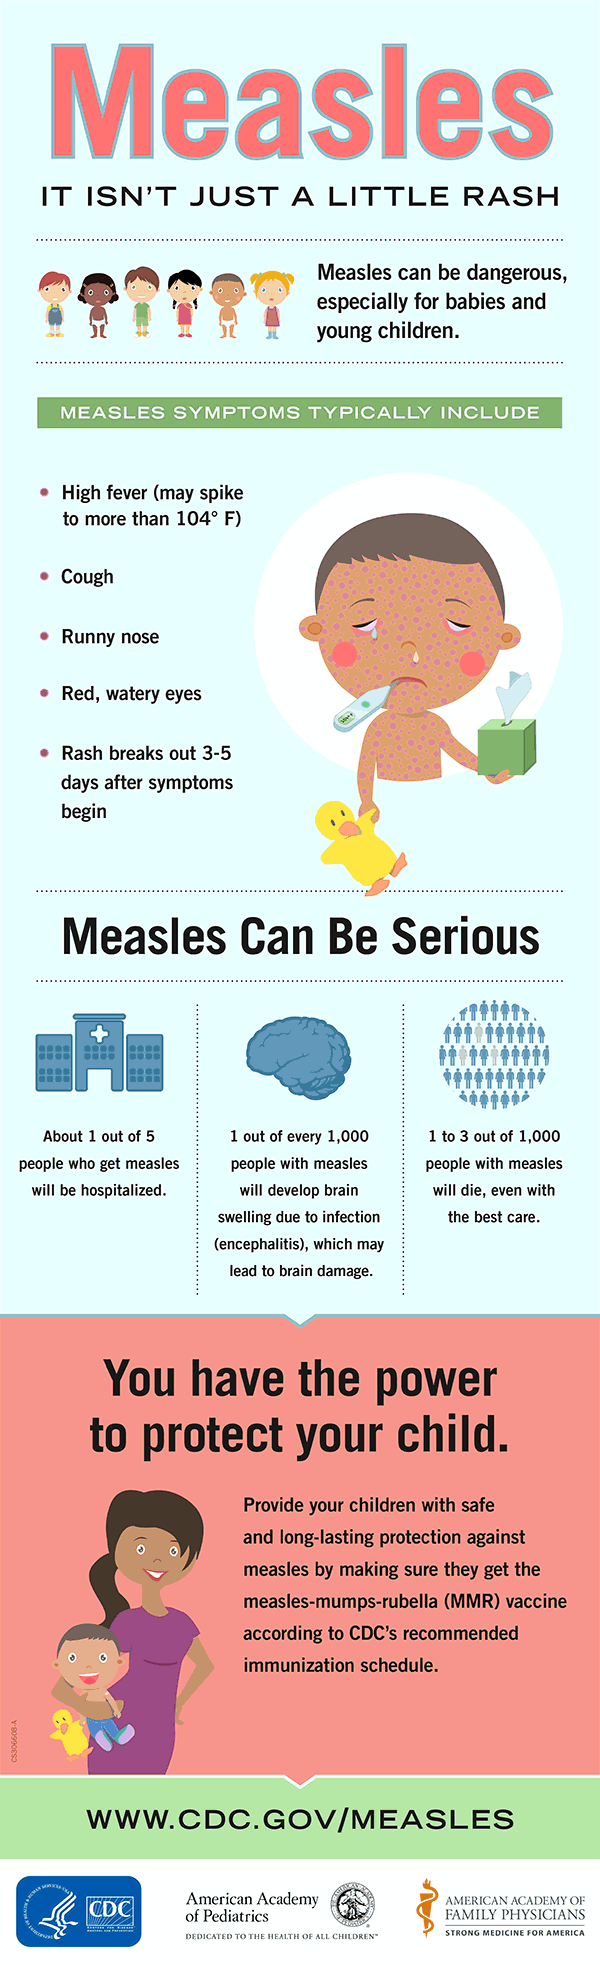 Information on Measles